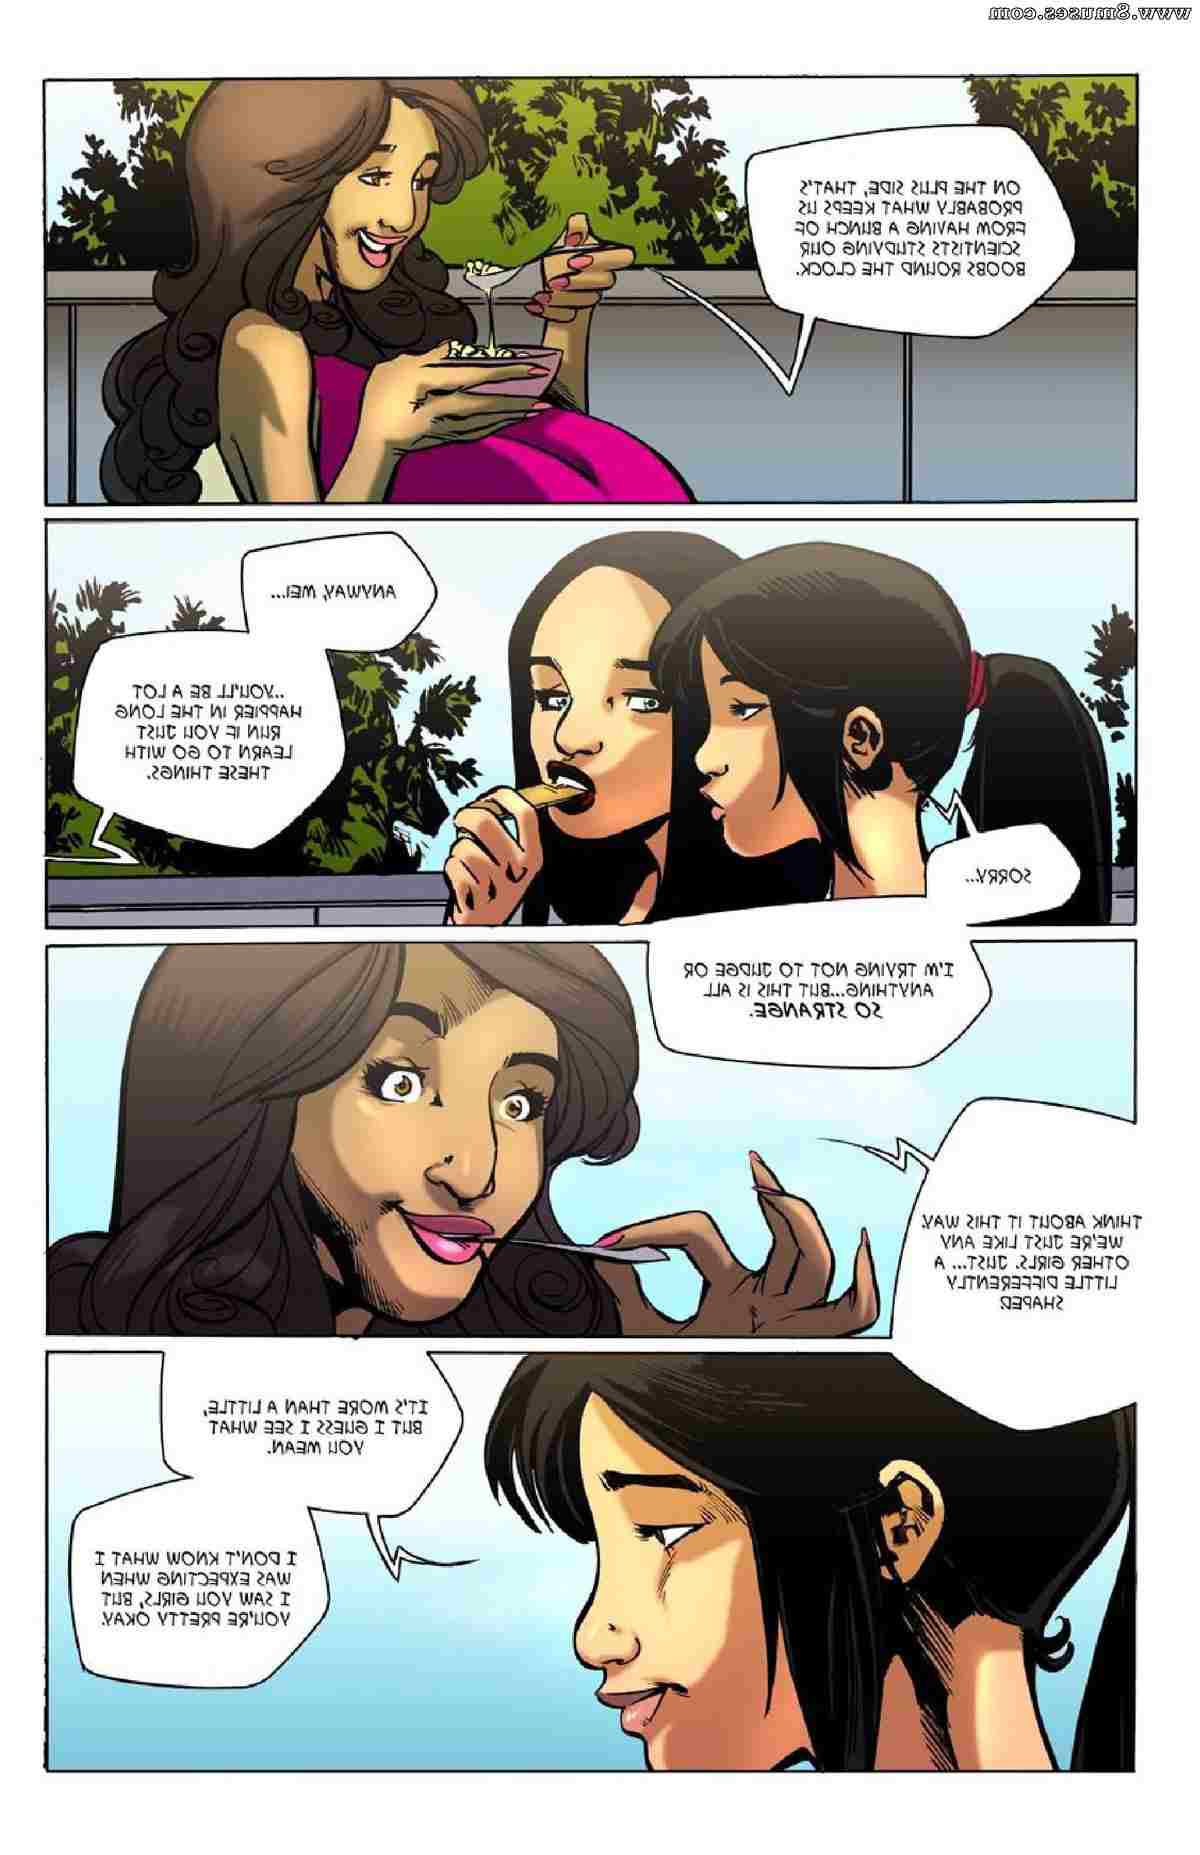 BE-Story-Club-Comics/Welcome-to-Chastity Welcome_to_Chastity__8muses_-_Sex_and_Porn_Comics_18.jpg